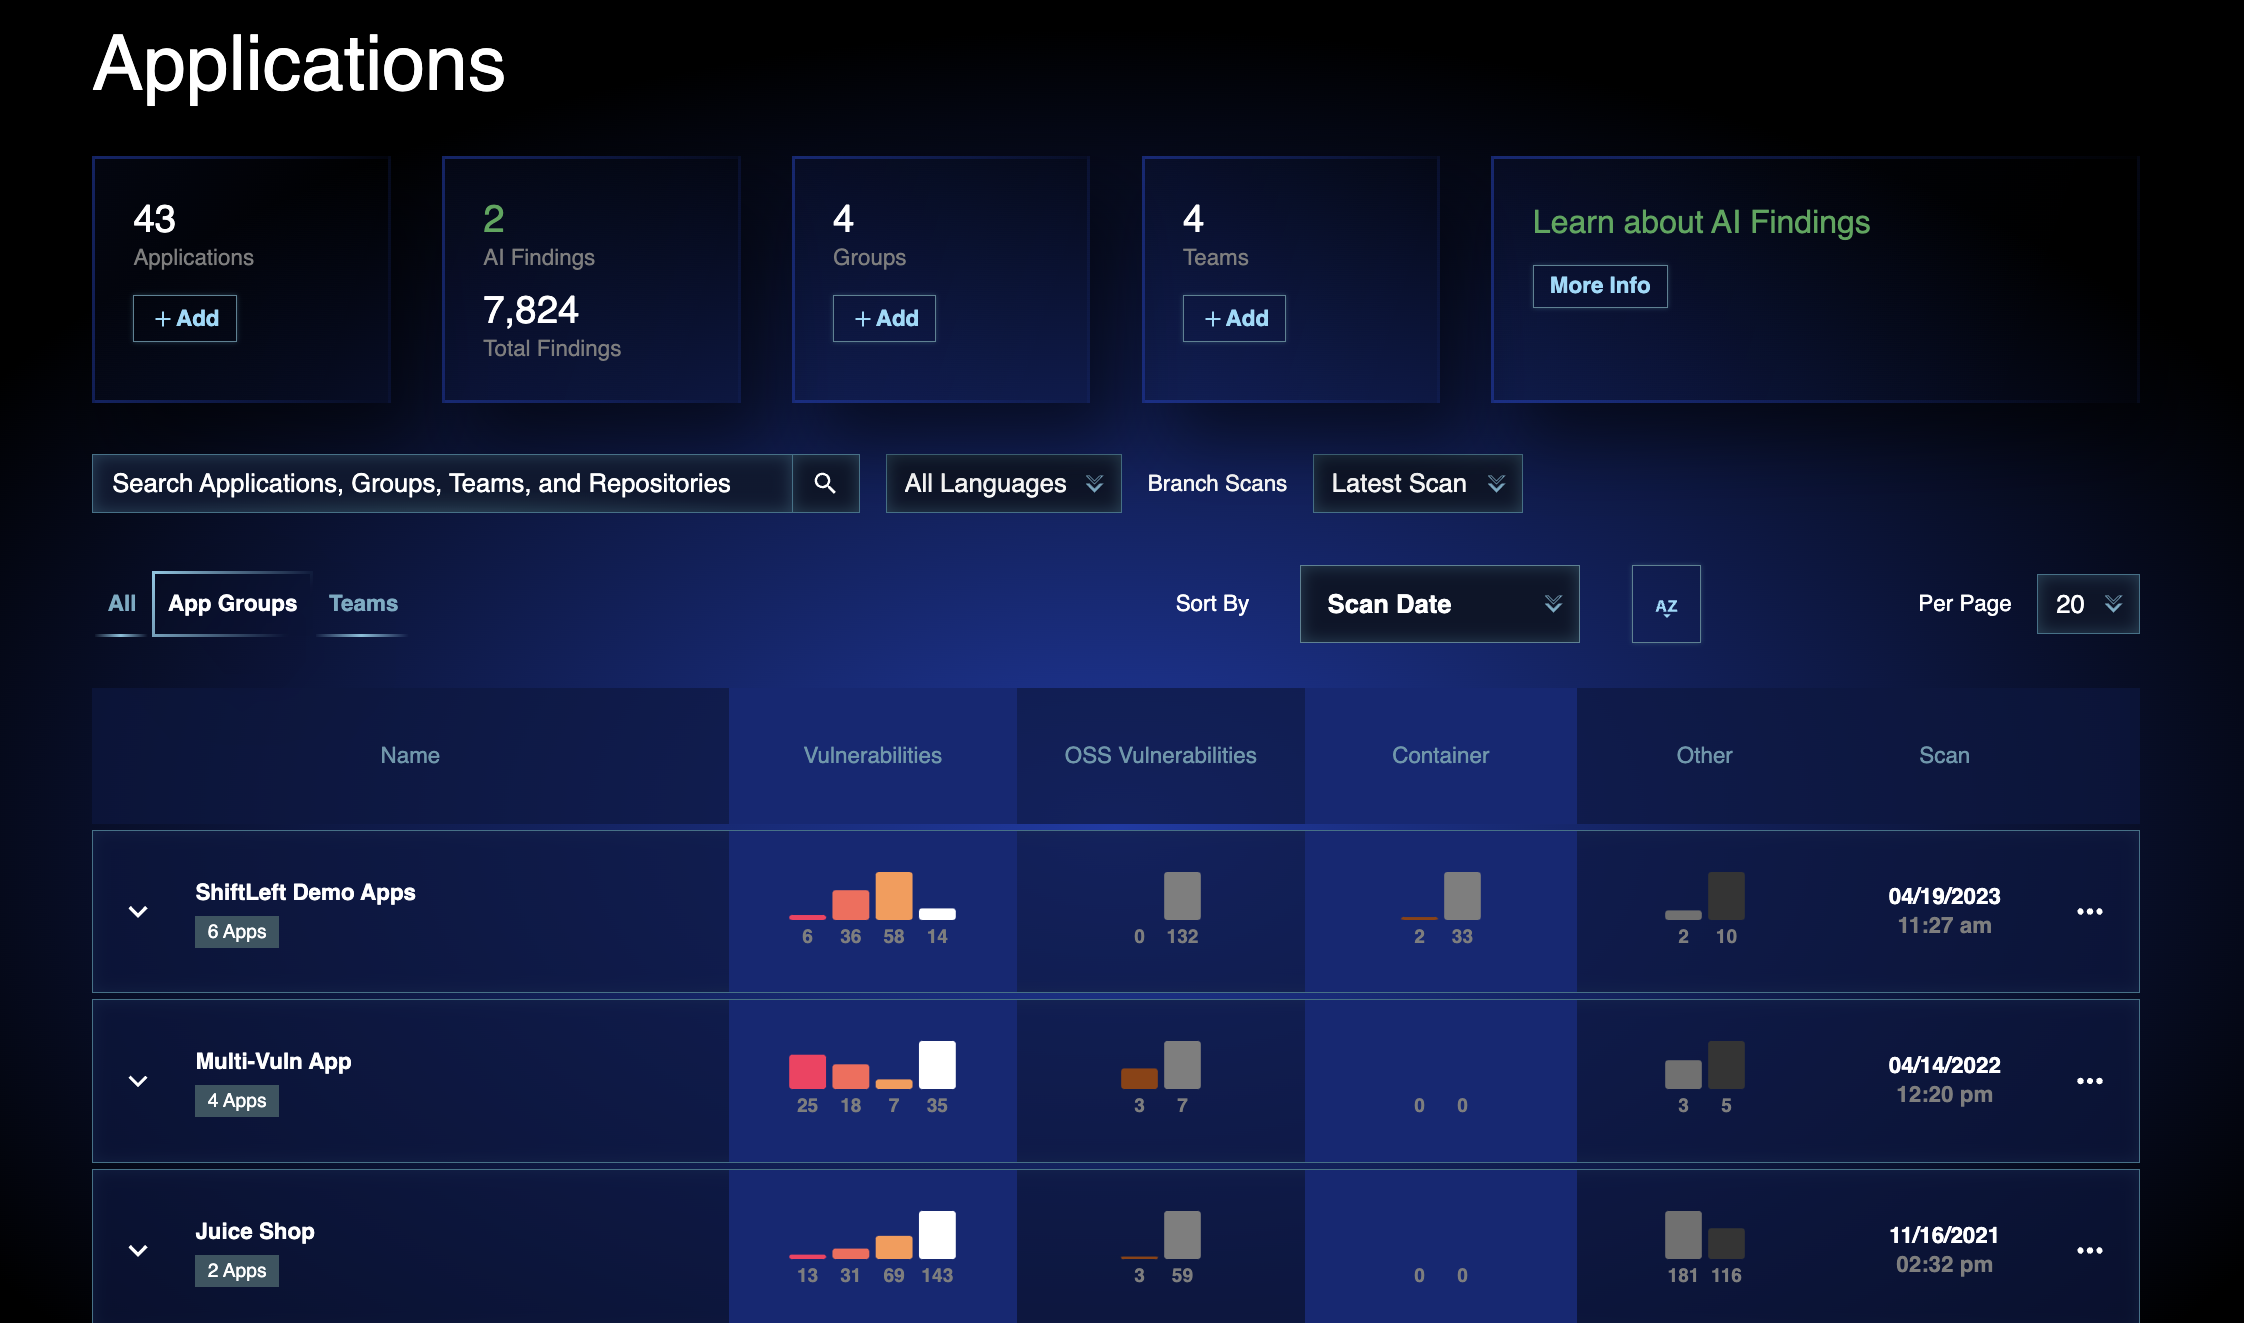 A view of three app groups in the dashboard